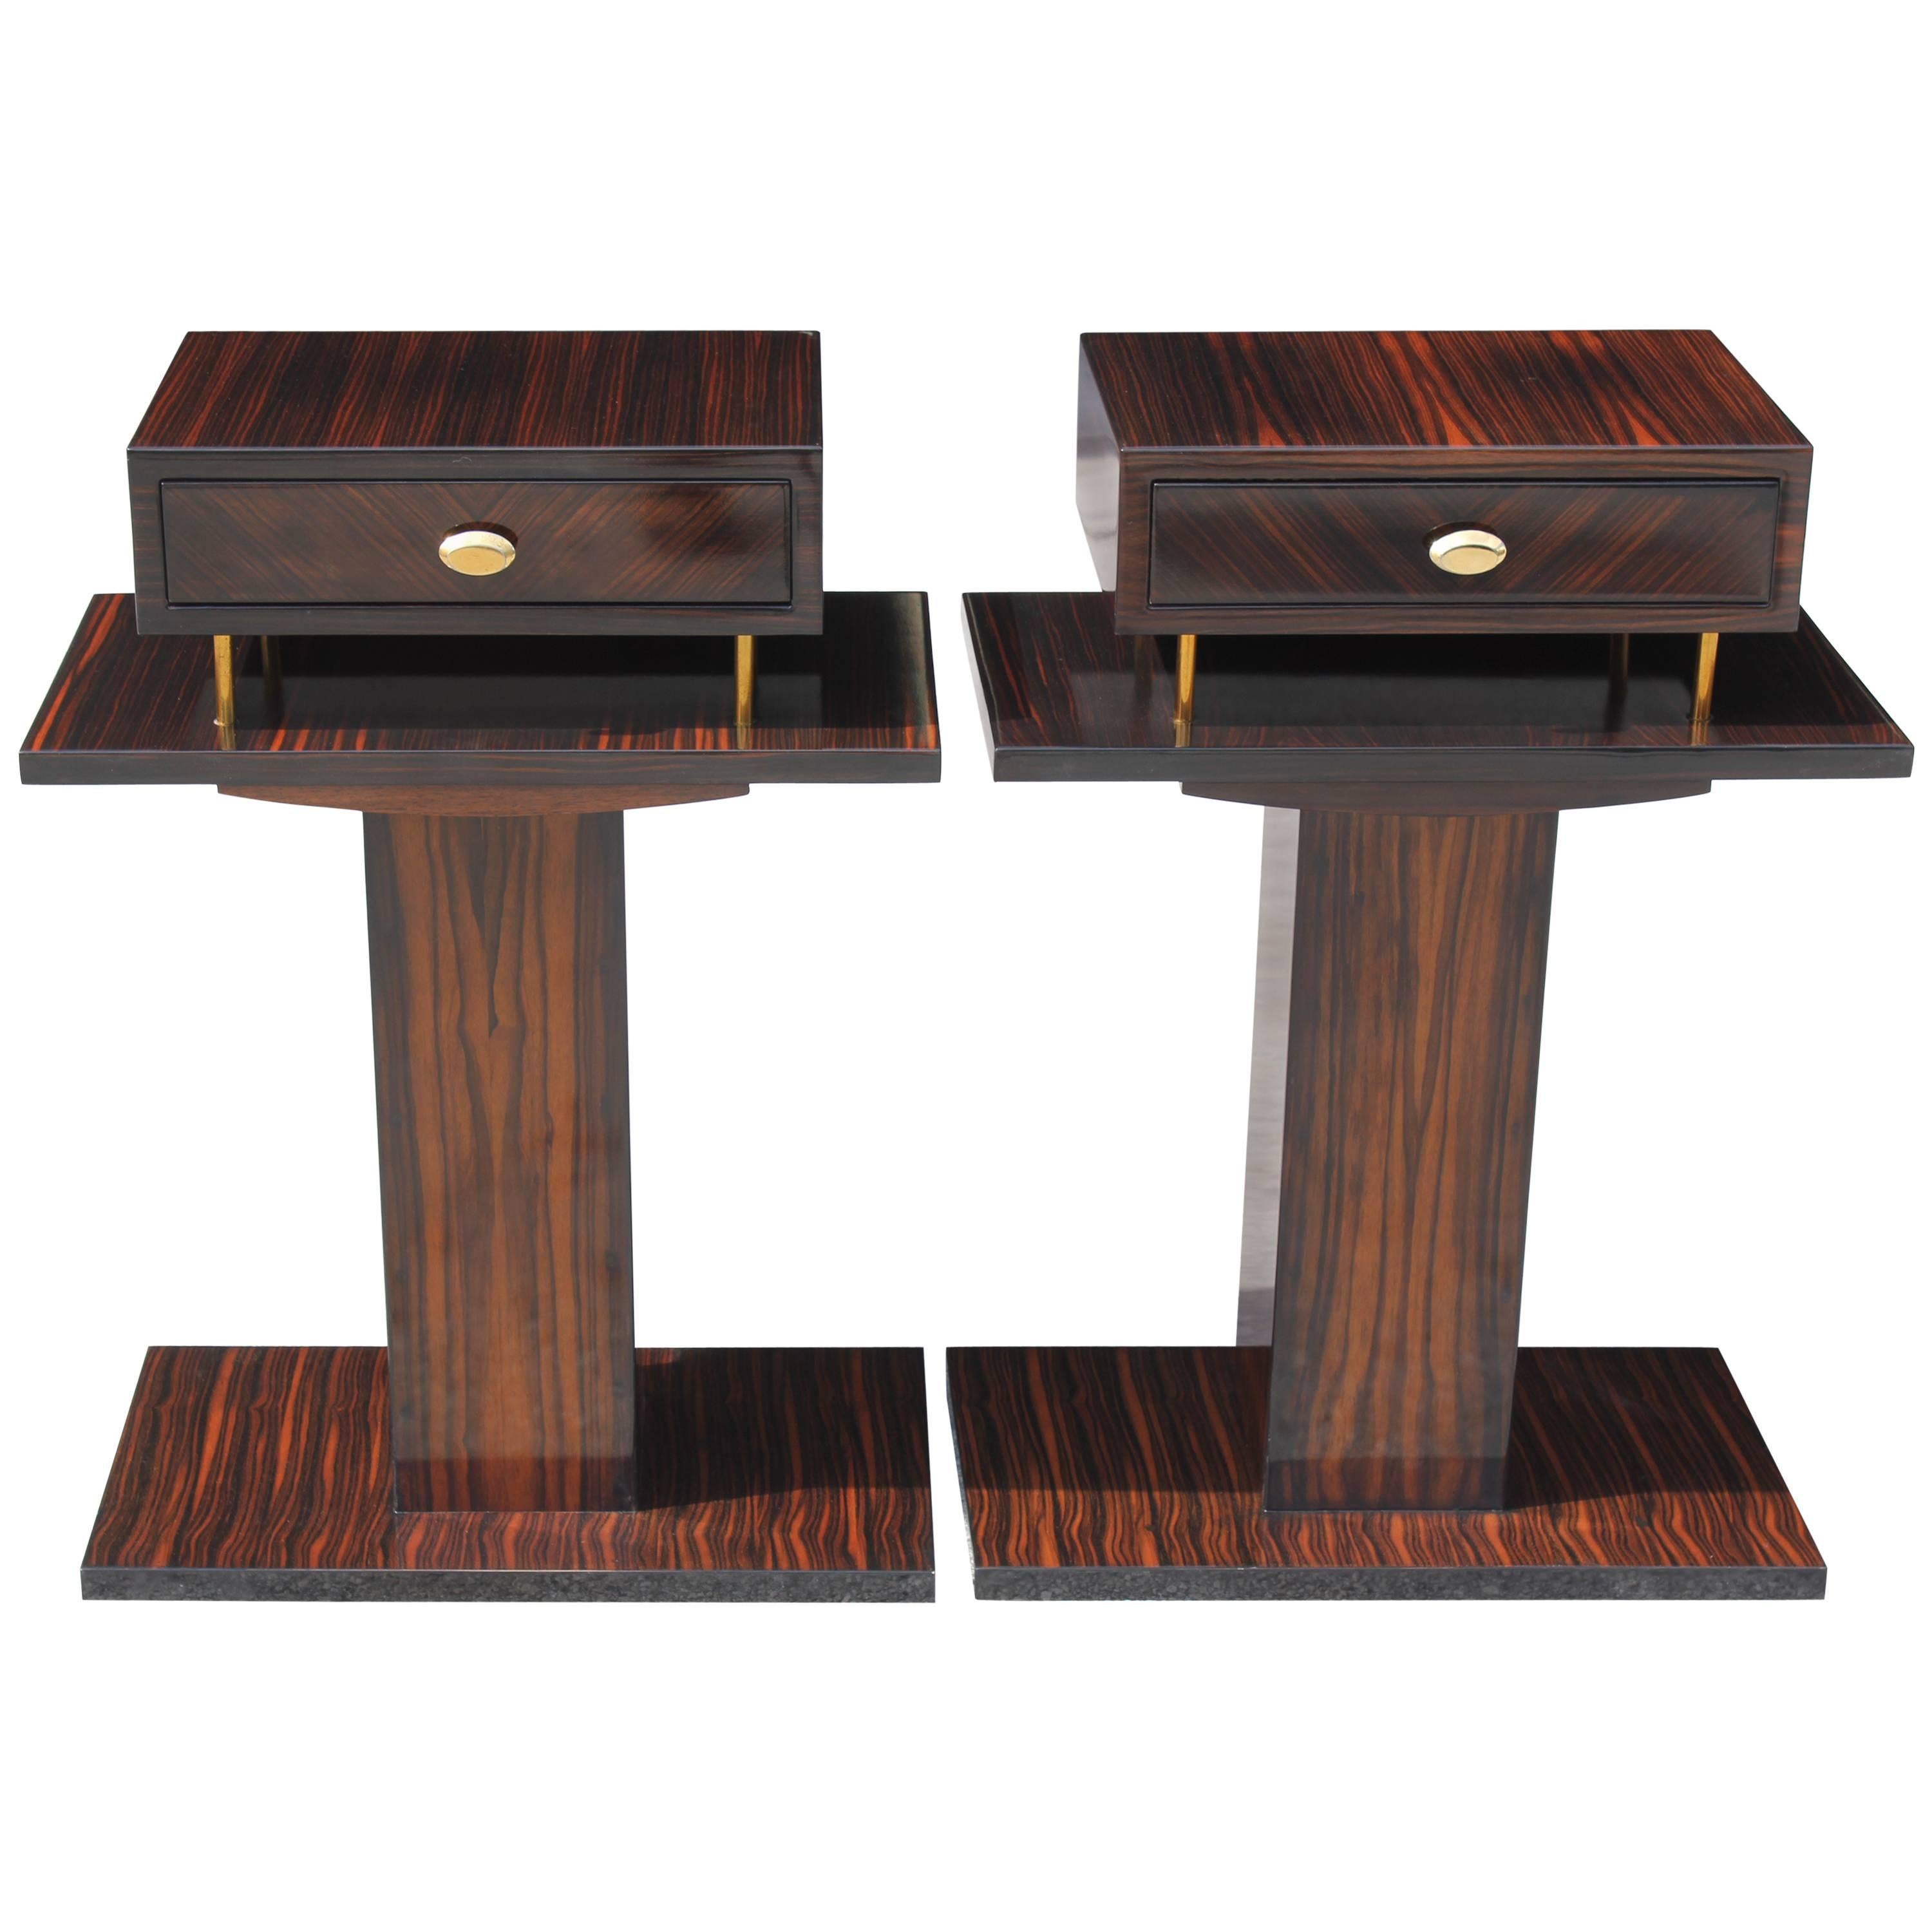 Grand Pair French Art Deco Exotic Macassar Ebony Night Tables, End Tables, 1940s